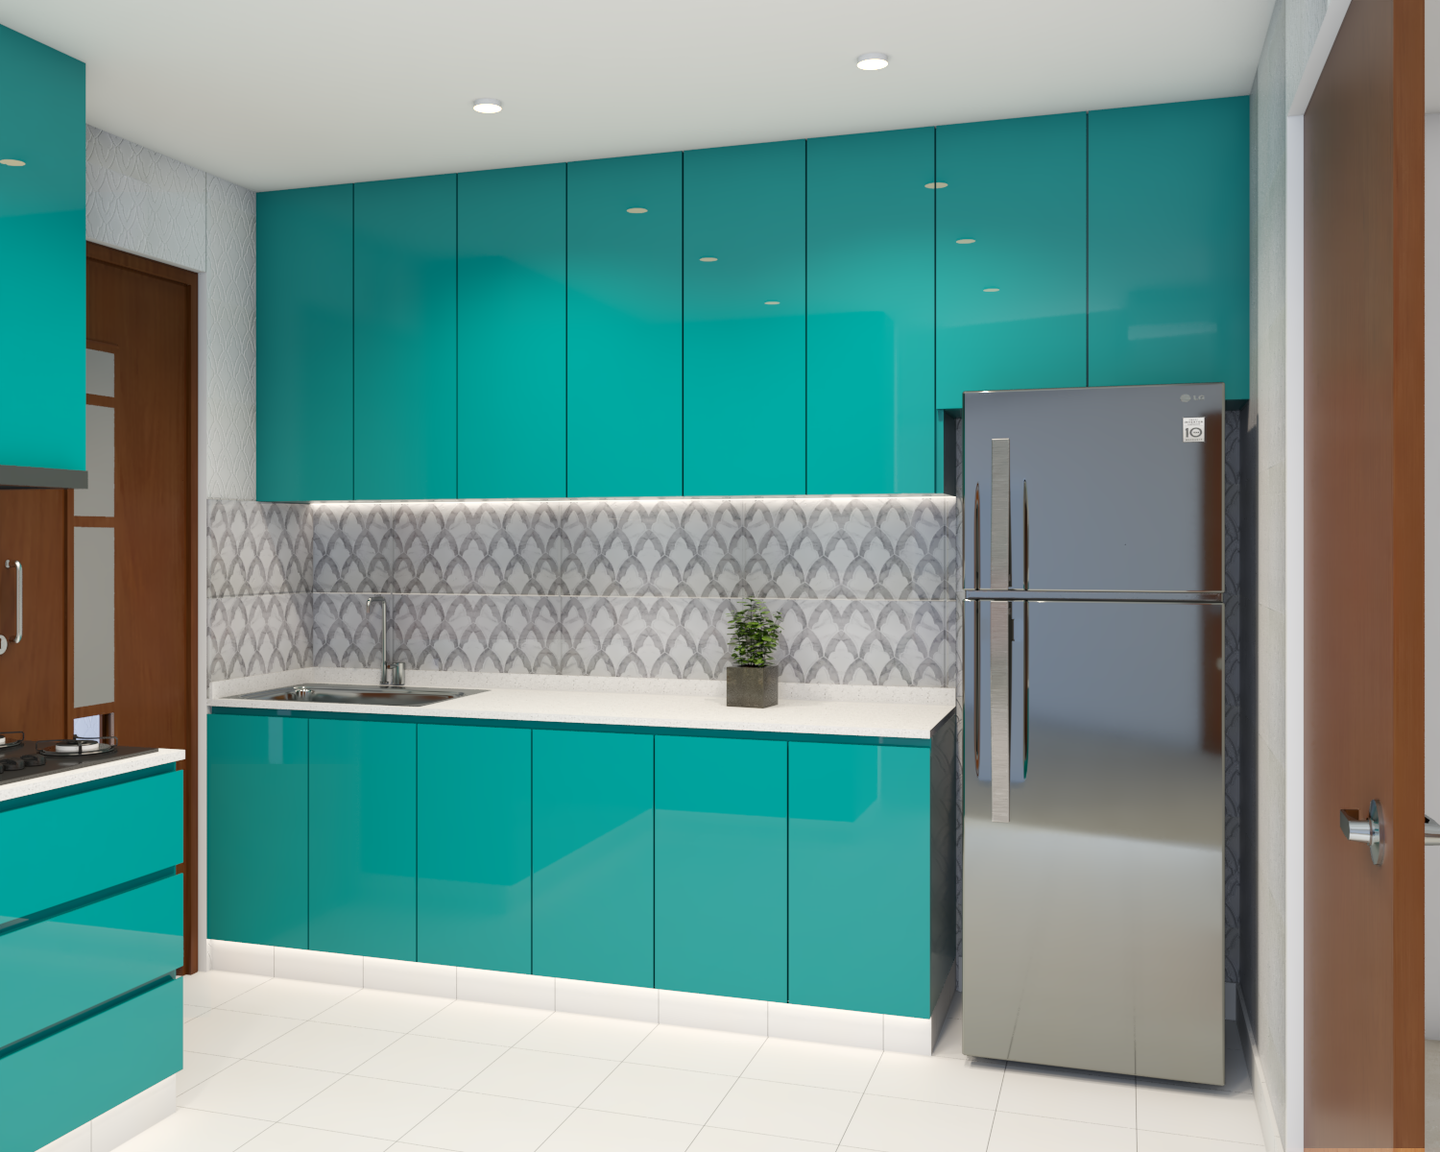 Spacious Kitchen Cabinet Design In Vibrant Green